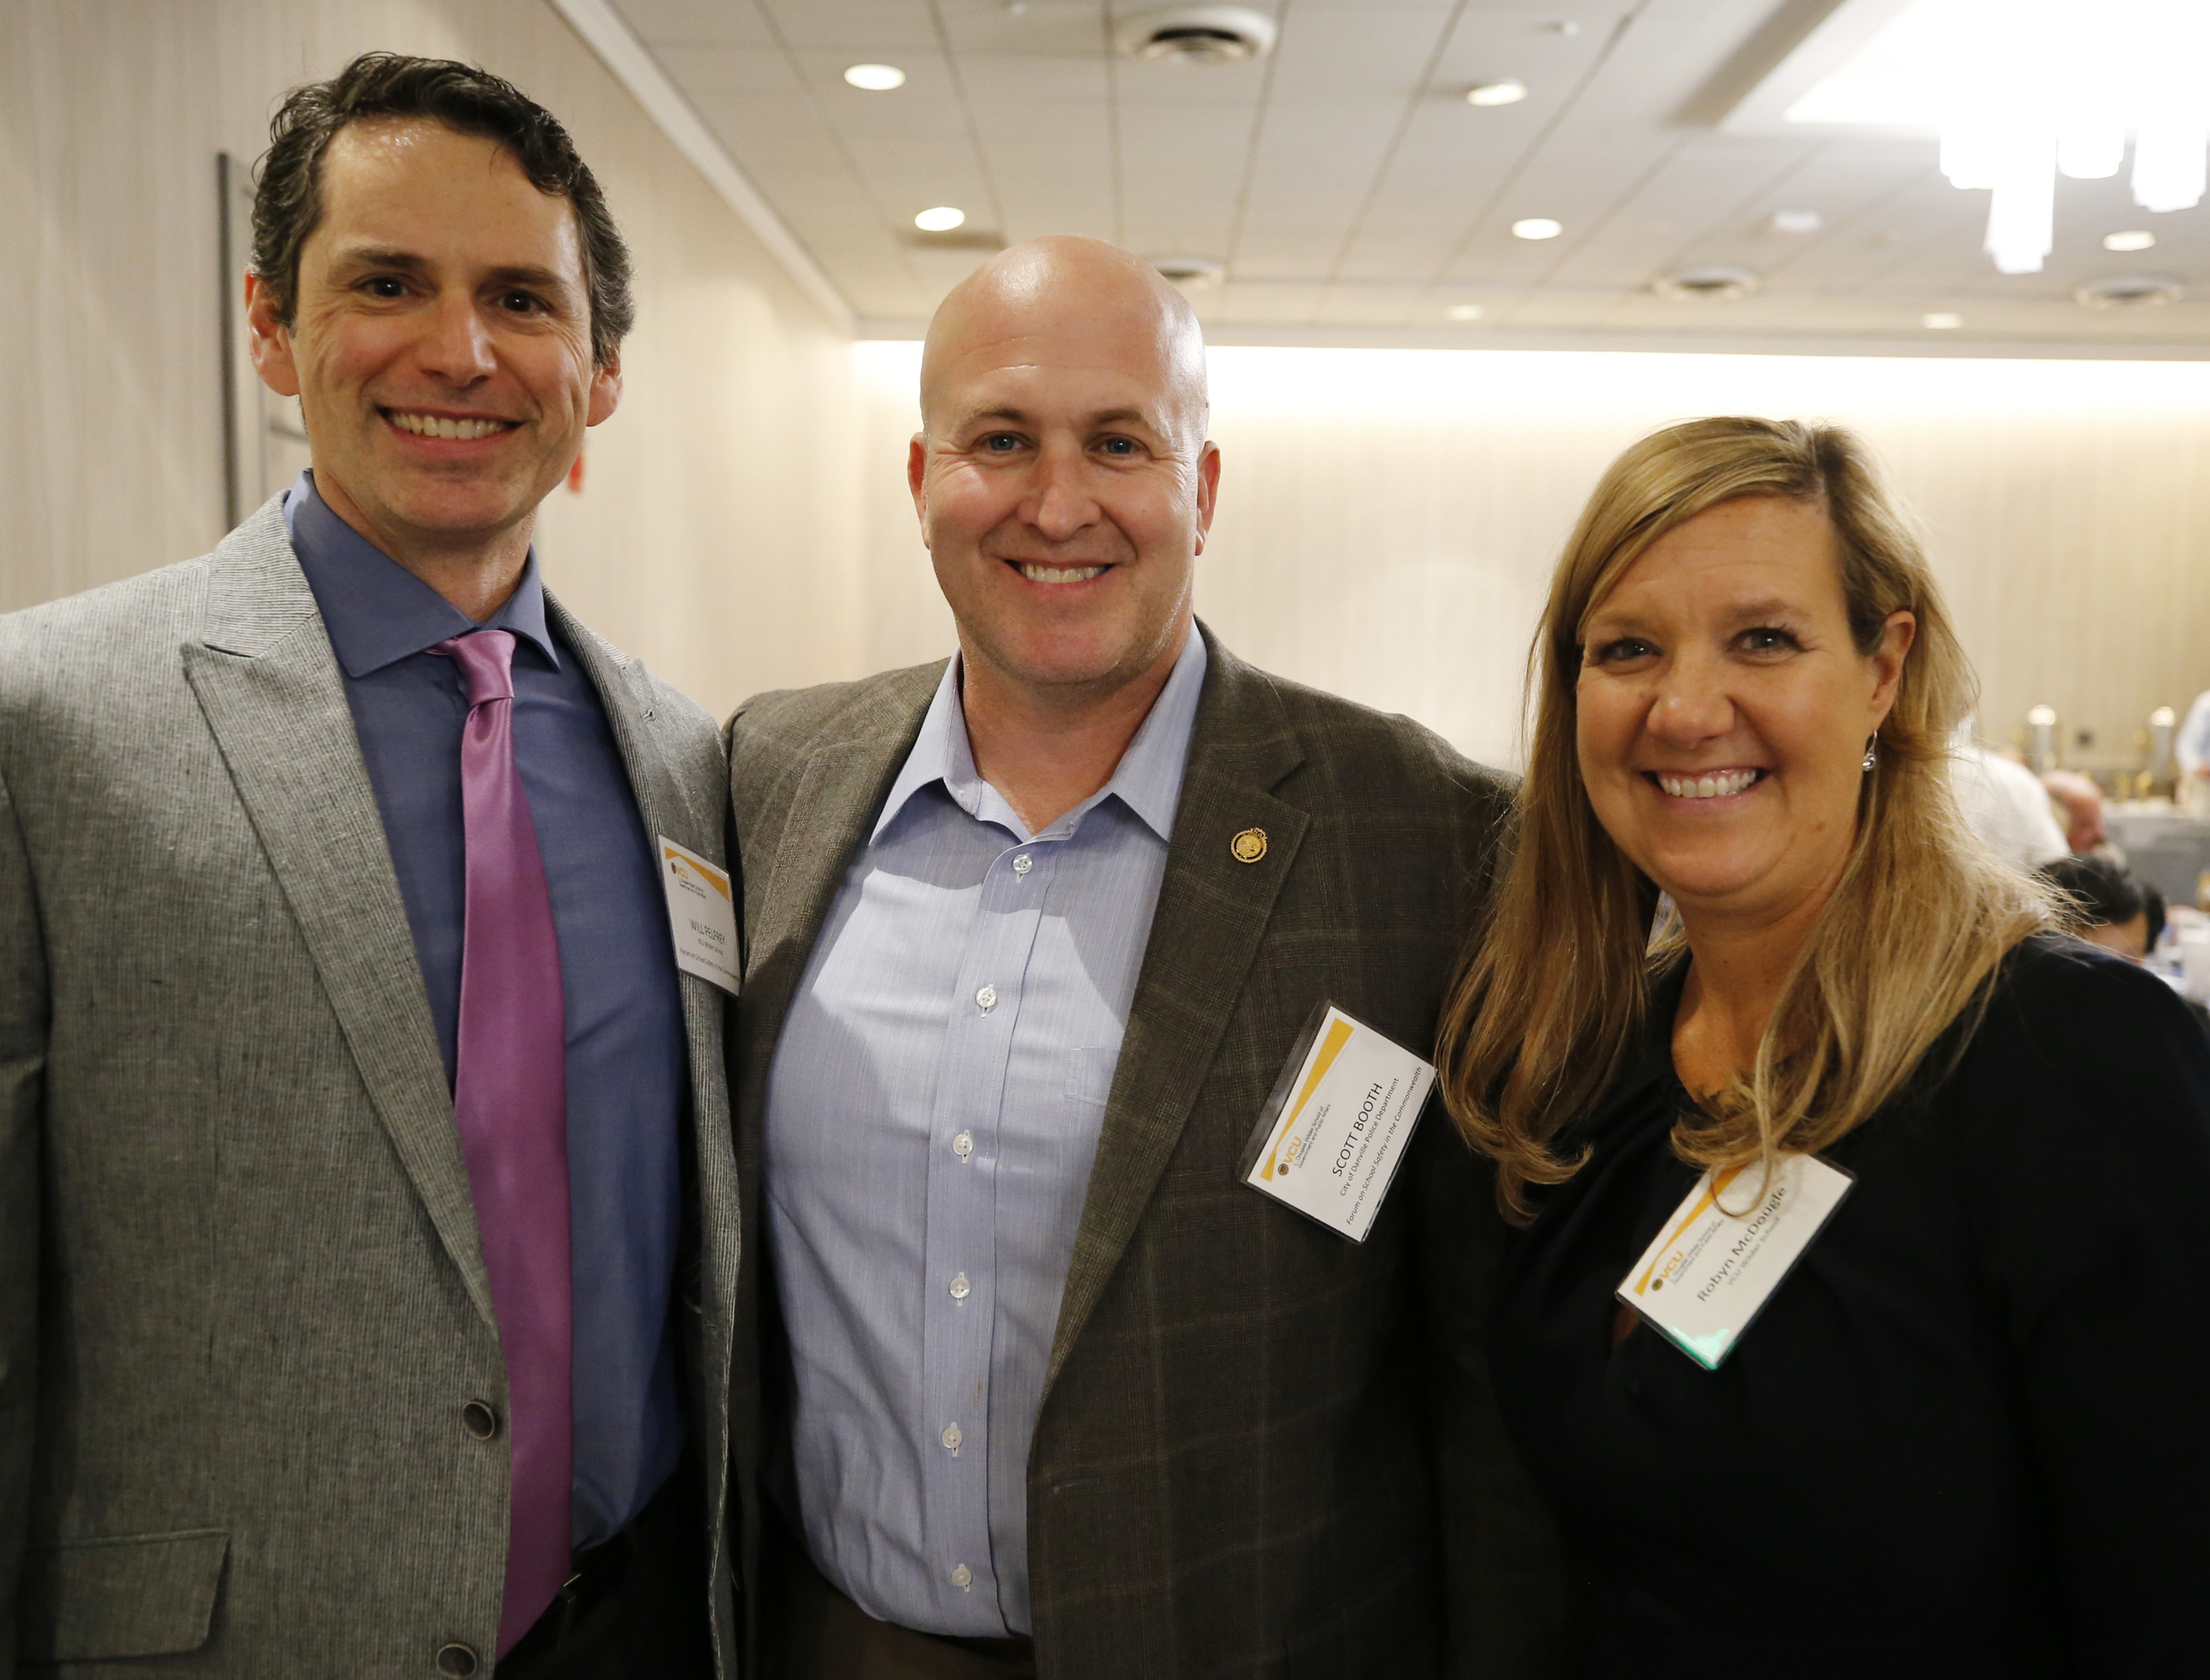 Dr. William V. Pelfrey Jr. (left), Wilder School associate professor, with Danville Police Chief and Wilder School alumnus Scott Booth, and Dr. Robyn McDougle, interim director of the Center for Public Policy, at the Forum on School Safety in the Commonwealth.